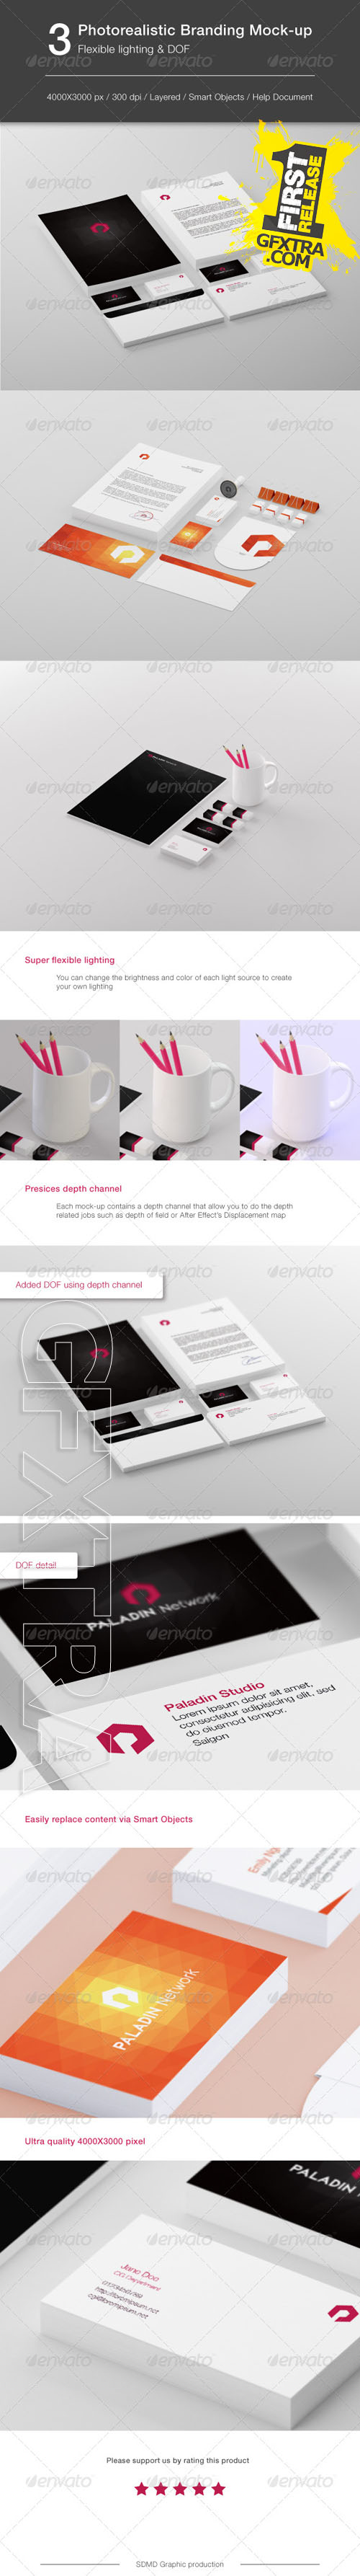 GraphicRiver - Flexible Lighting Stationery Mock-up